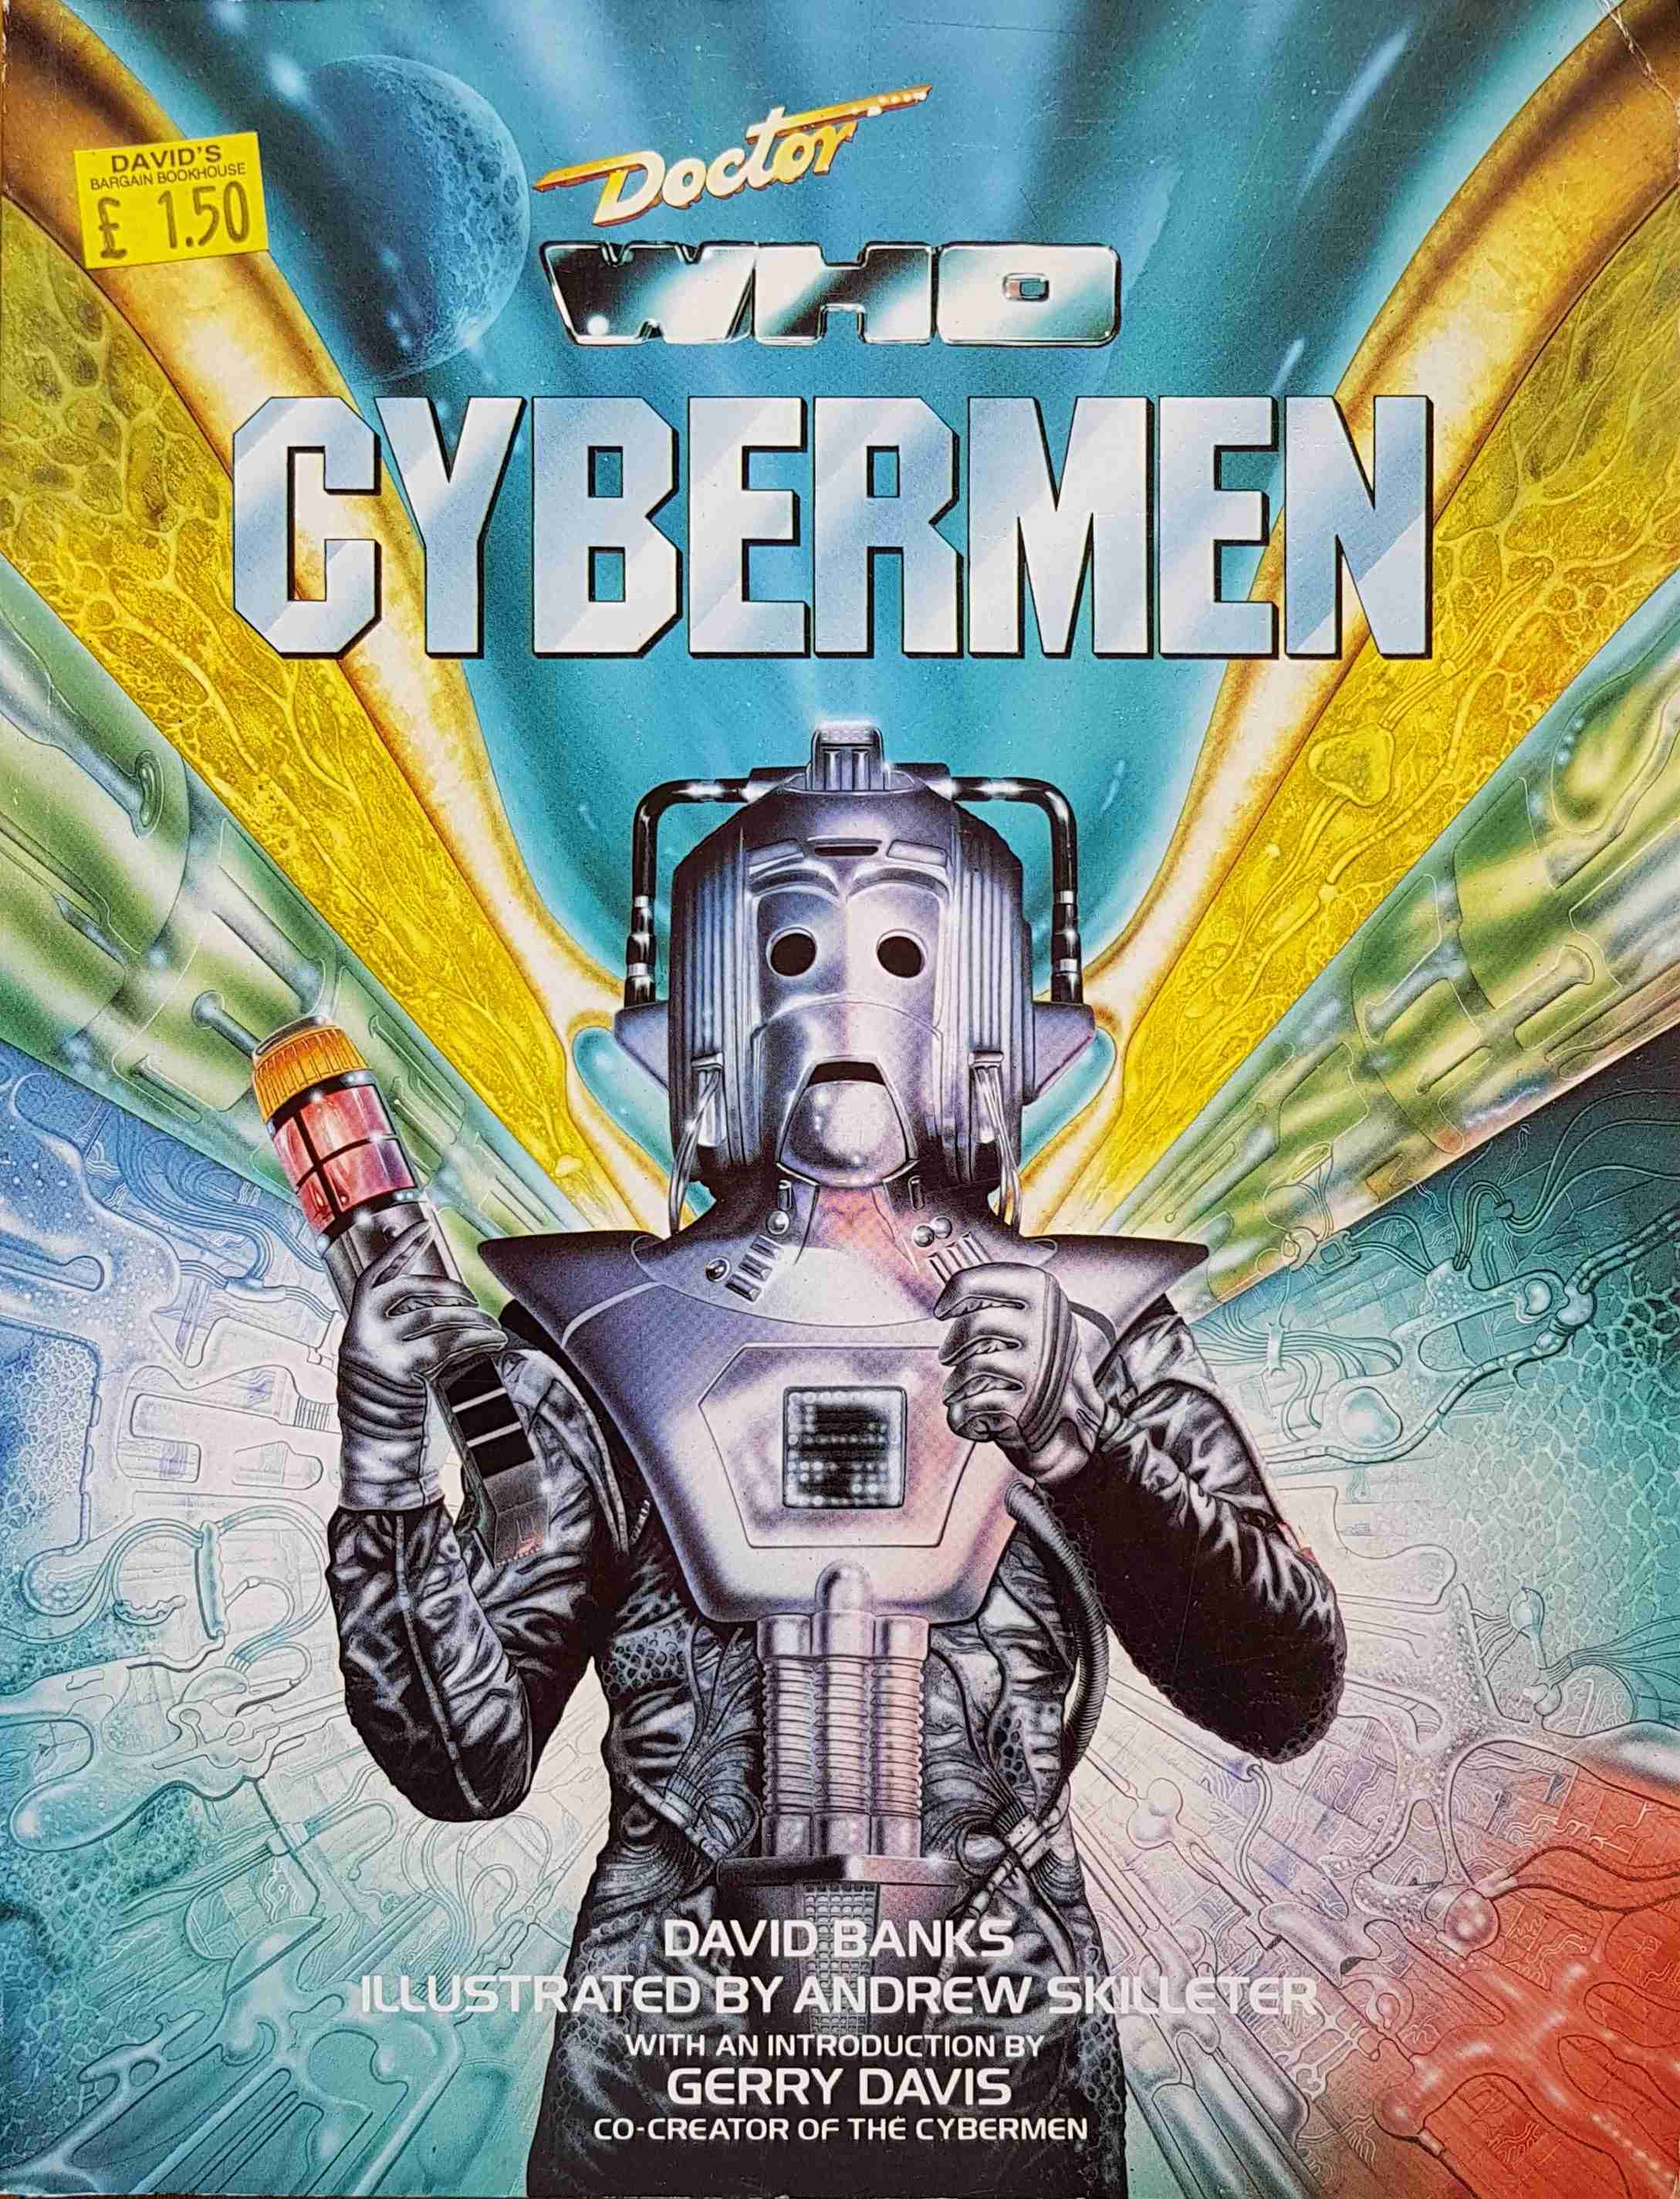 Picture of 0-357-32738-3 Doctor Who - Cybermen by artist David Banks from the BBC records and Tapes library